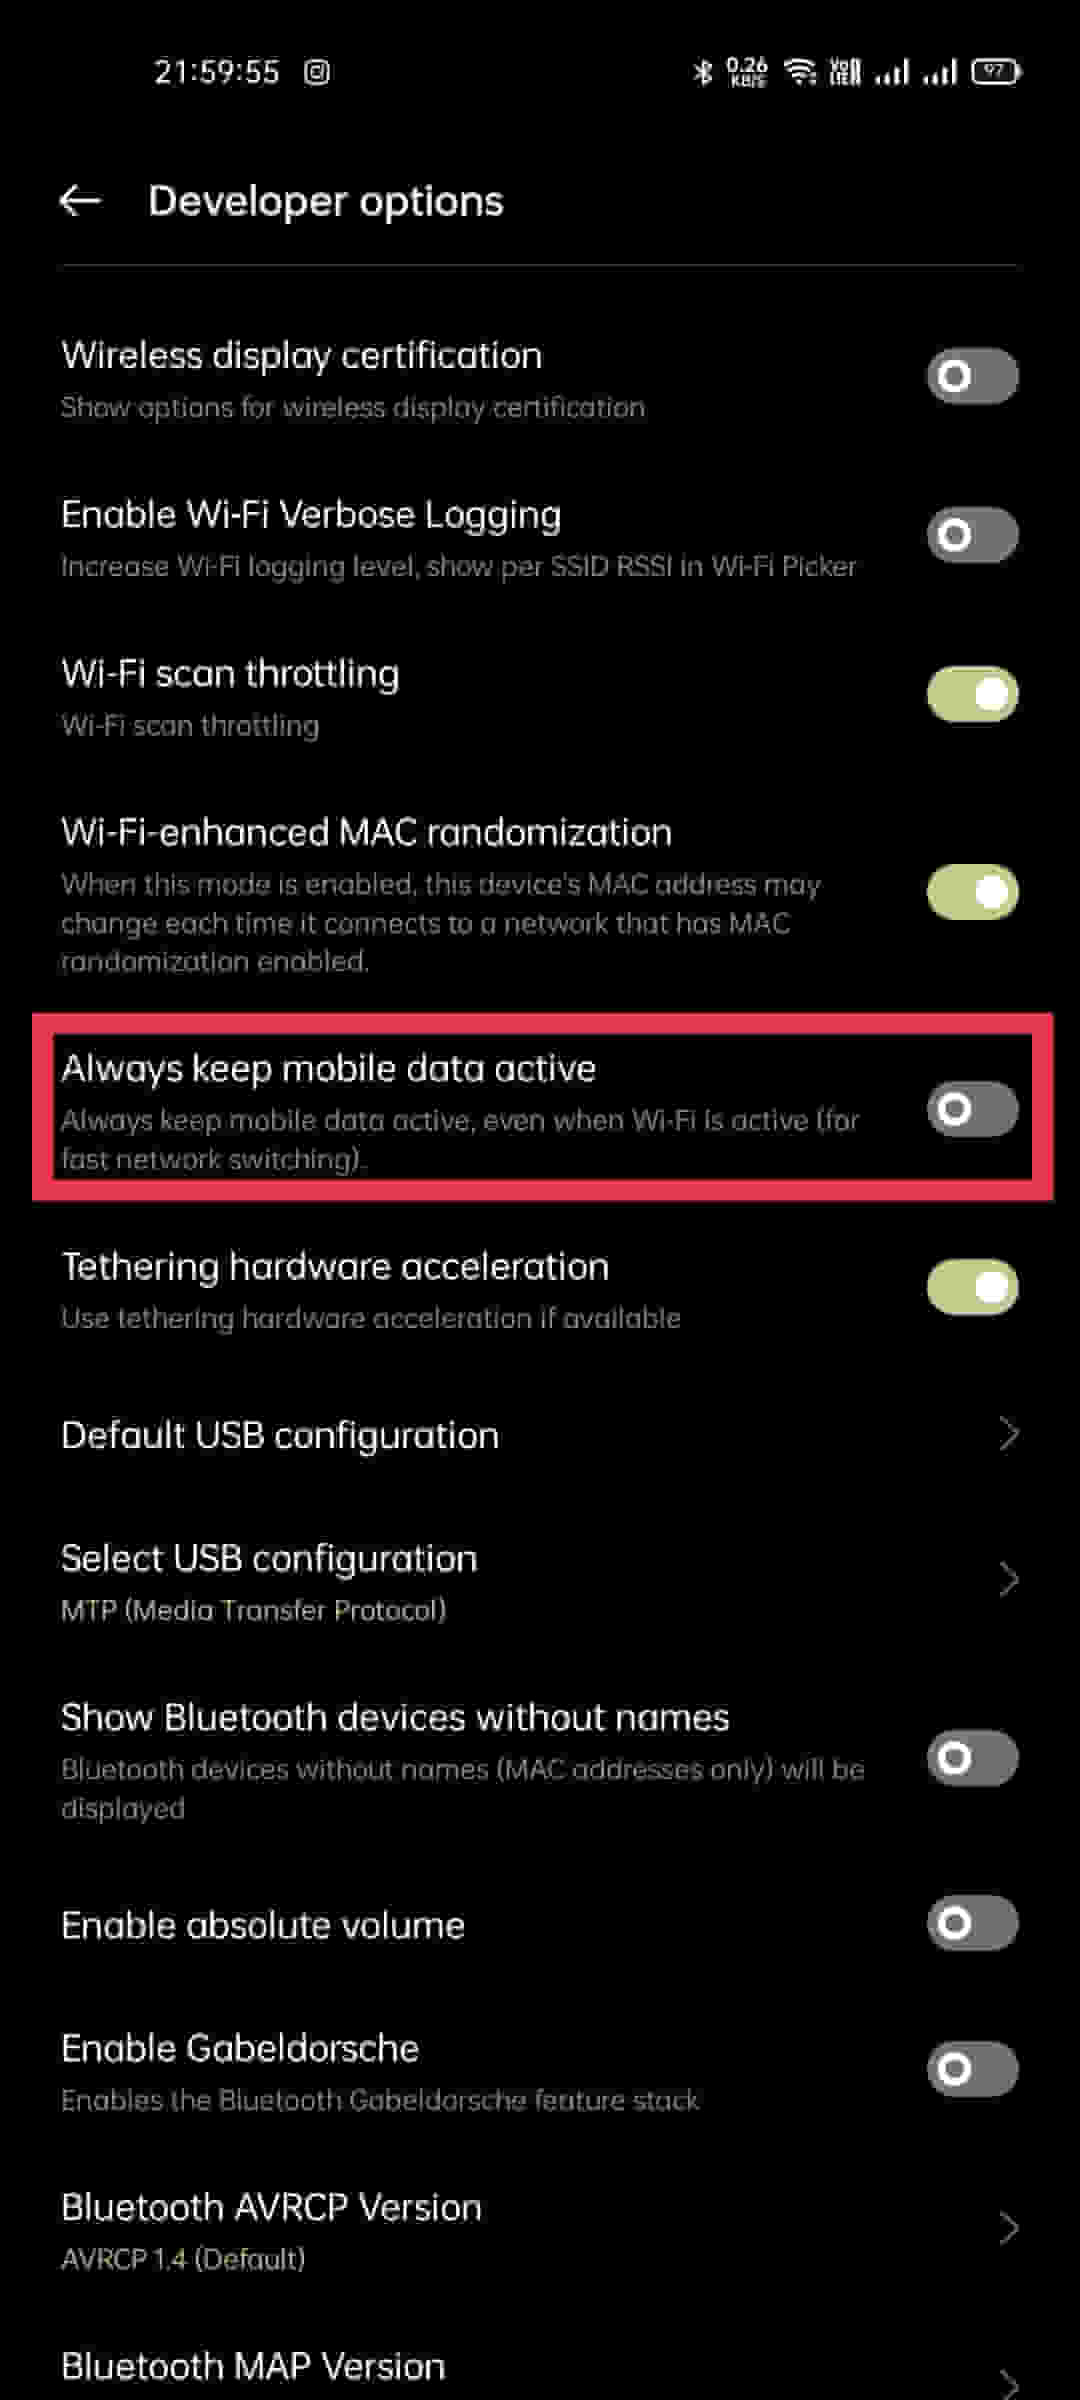 how to access developer options on android, android developer options, top 5 developer options on android, top 5 developer options, top 5 developer settings